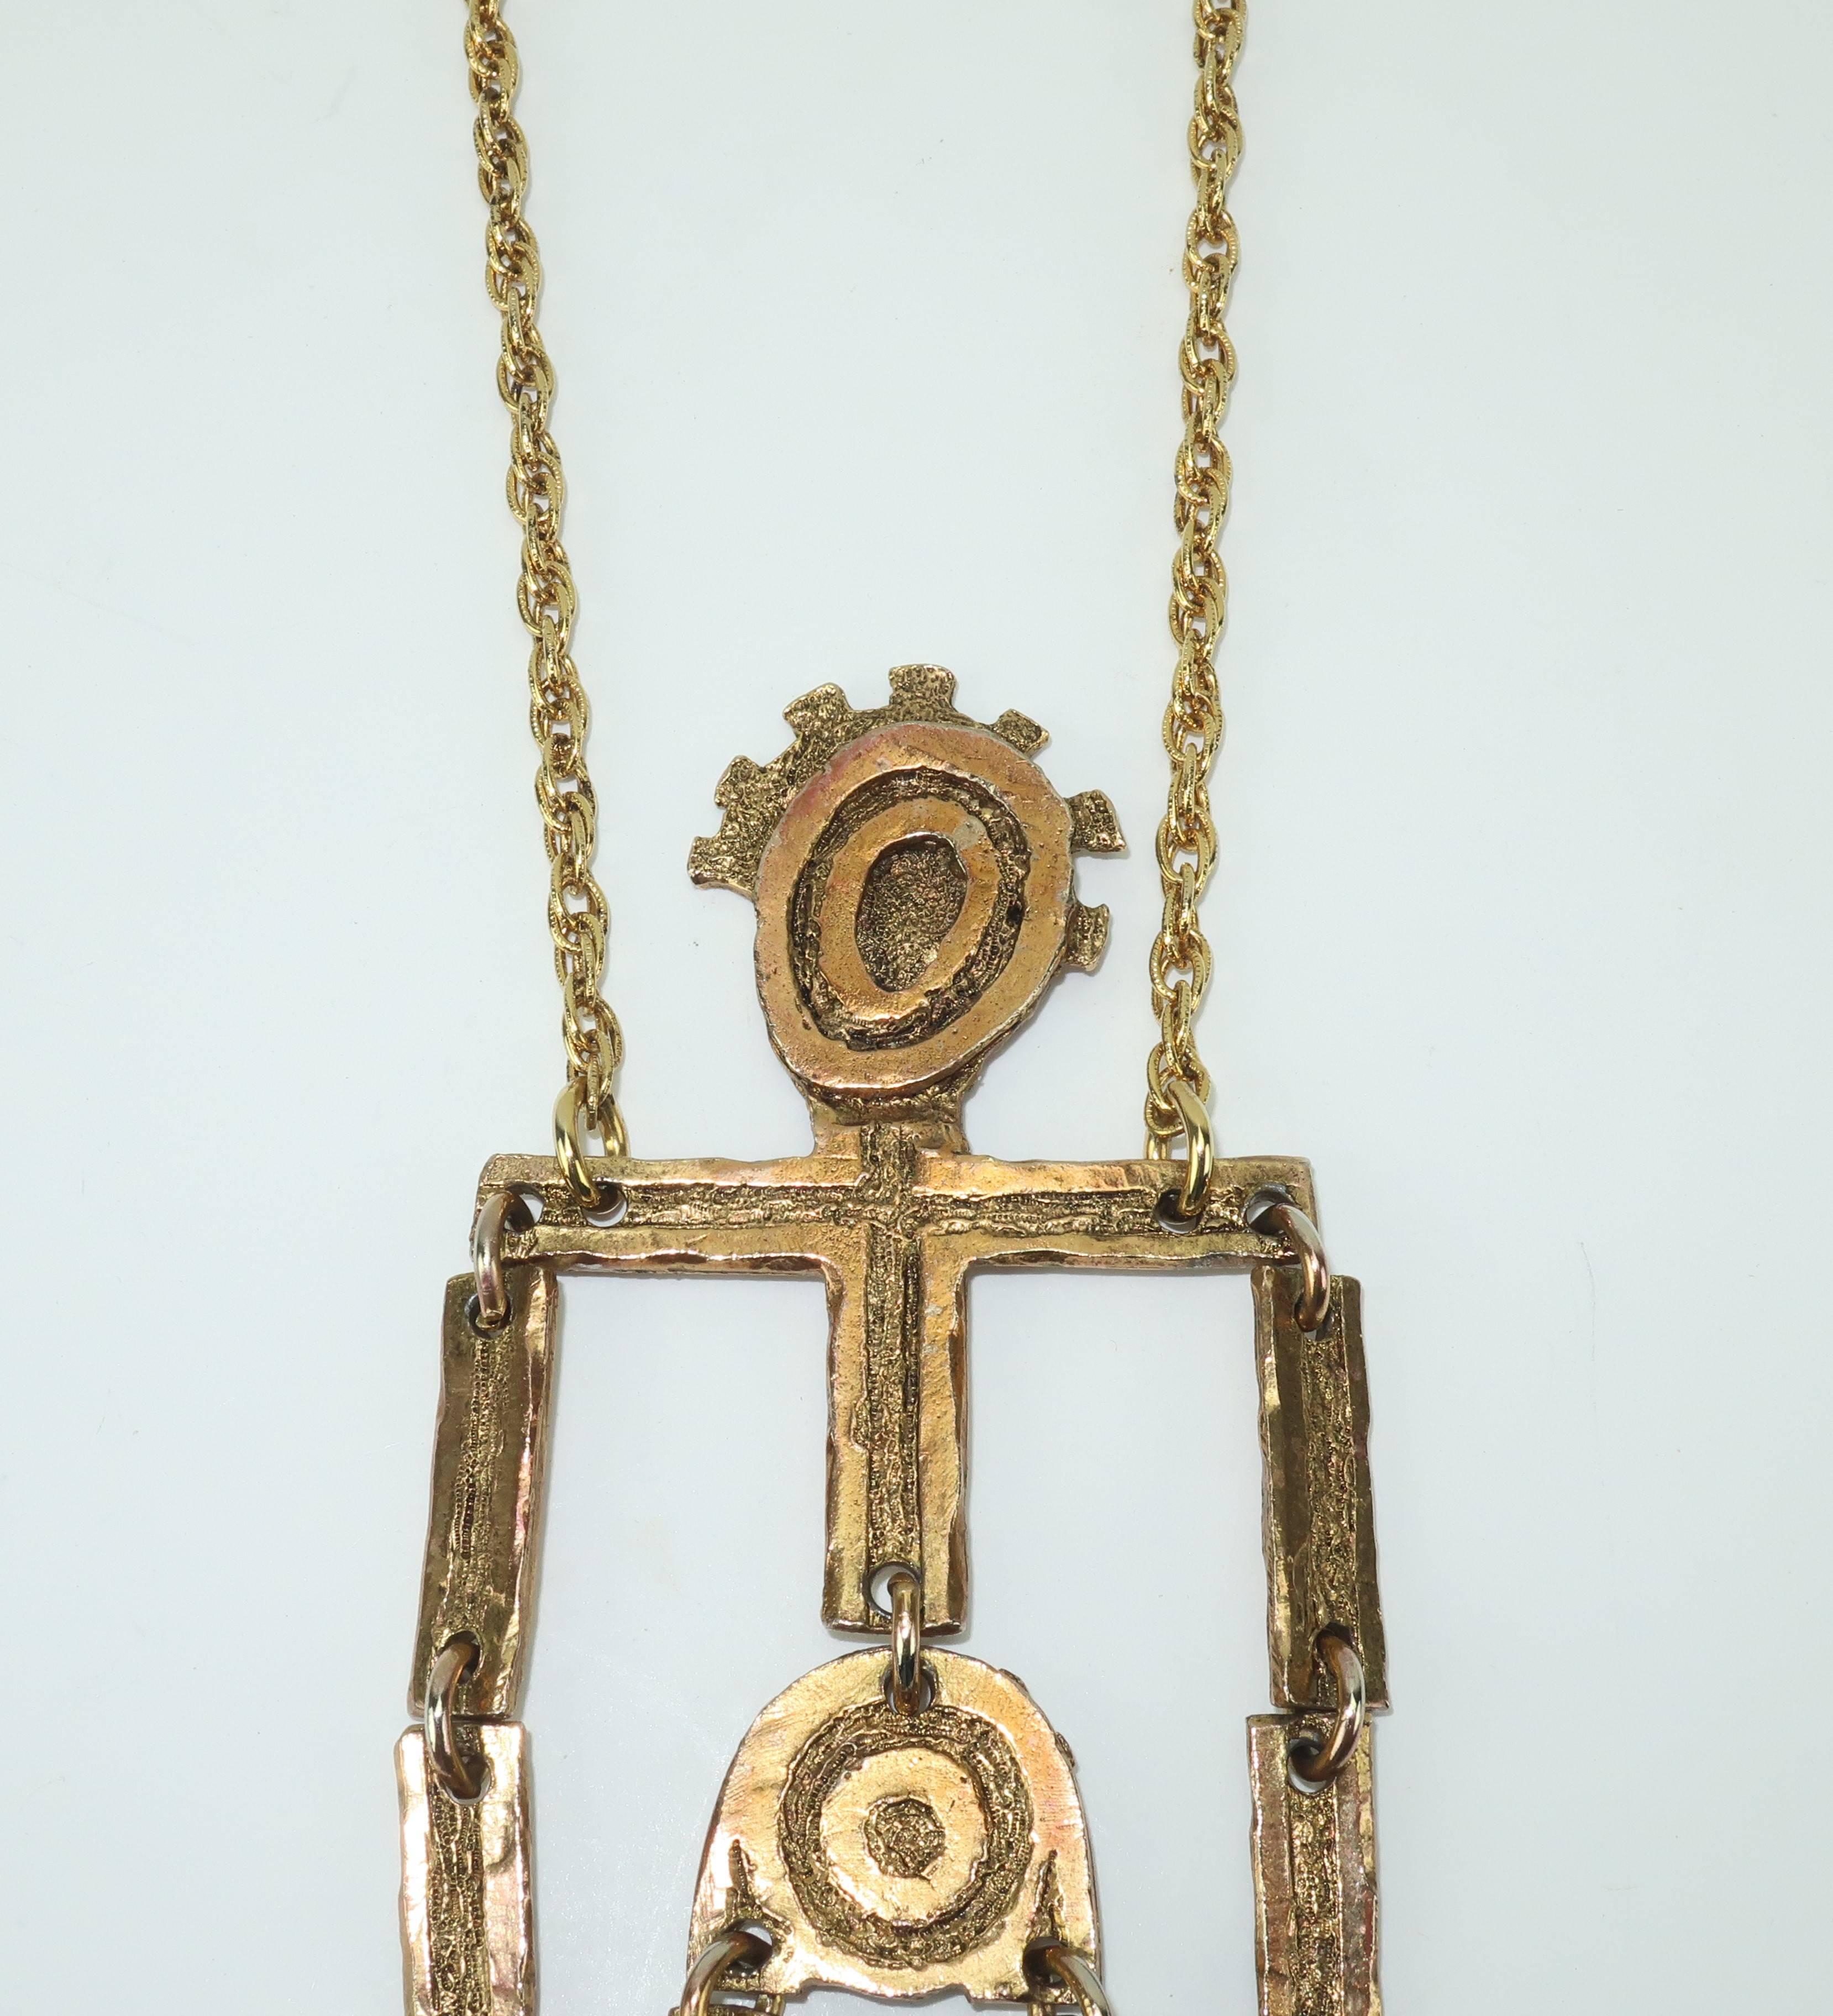 Modern C.1970 Mr. We Articulated Man Pendant Necklace